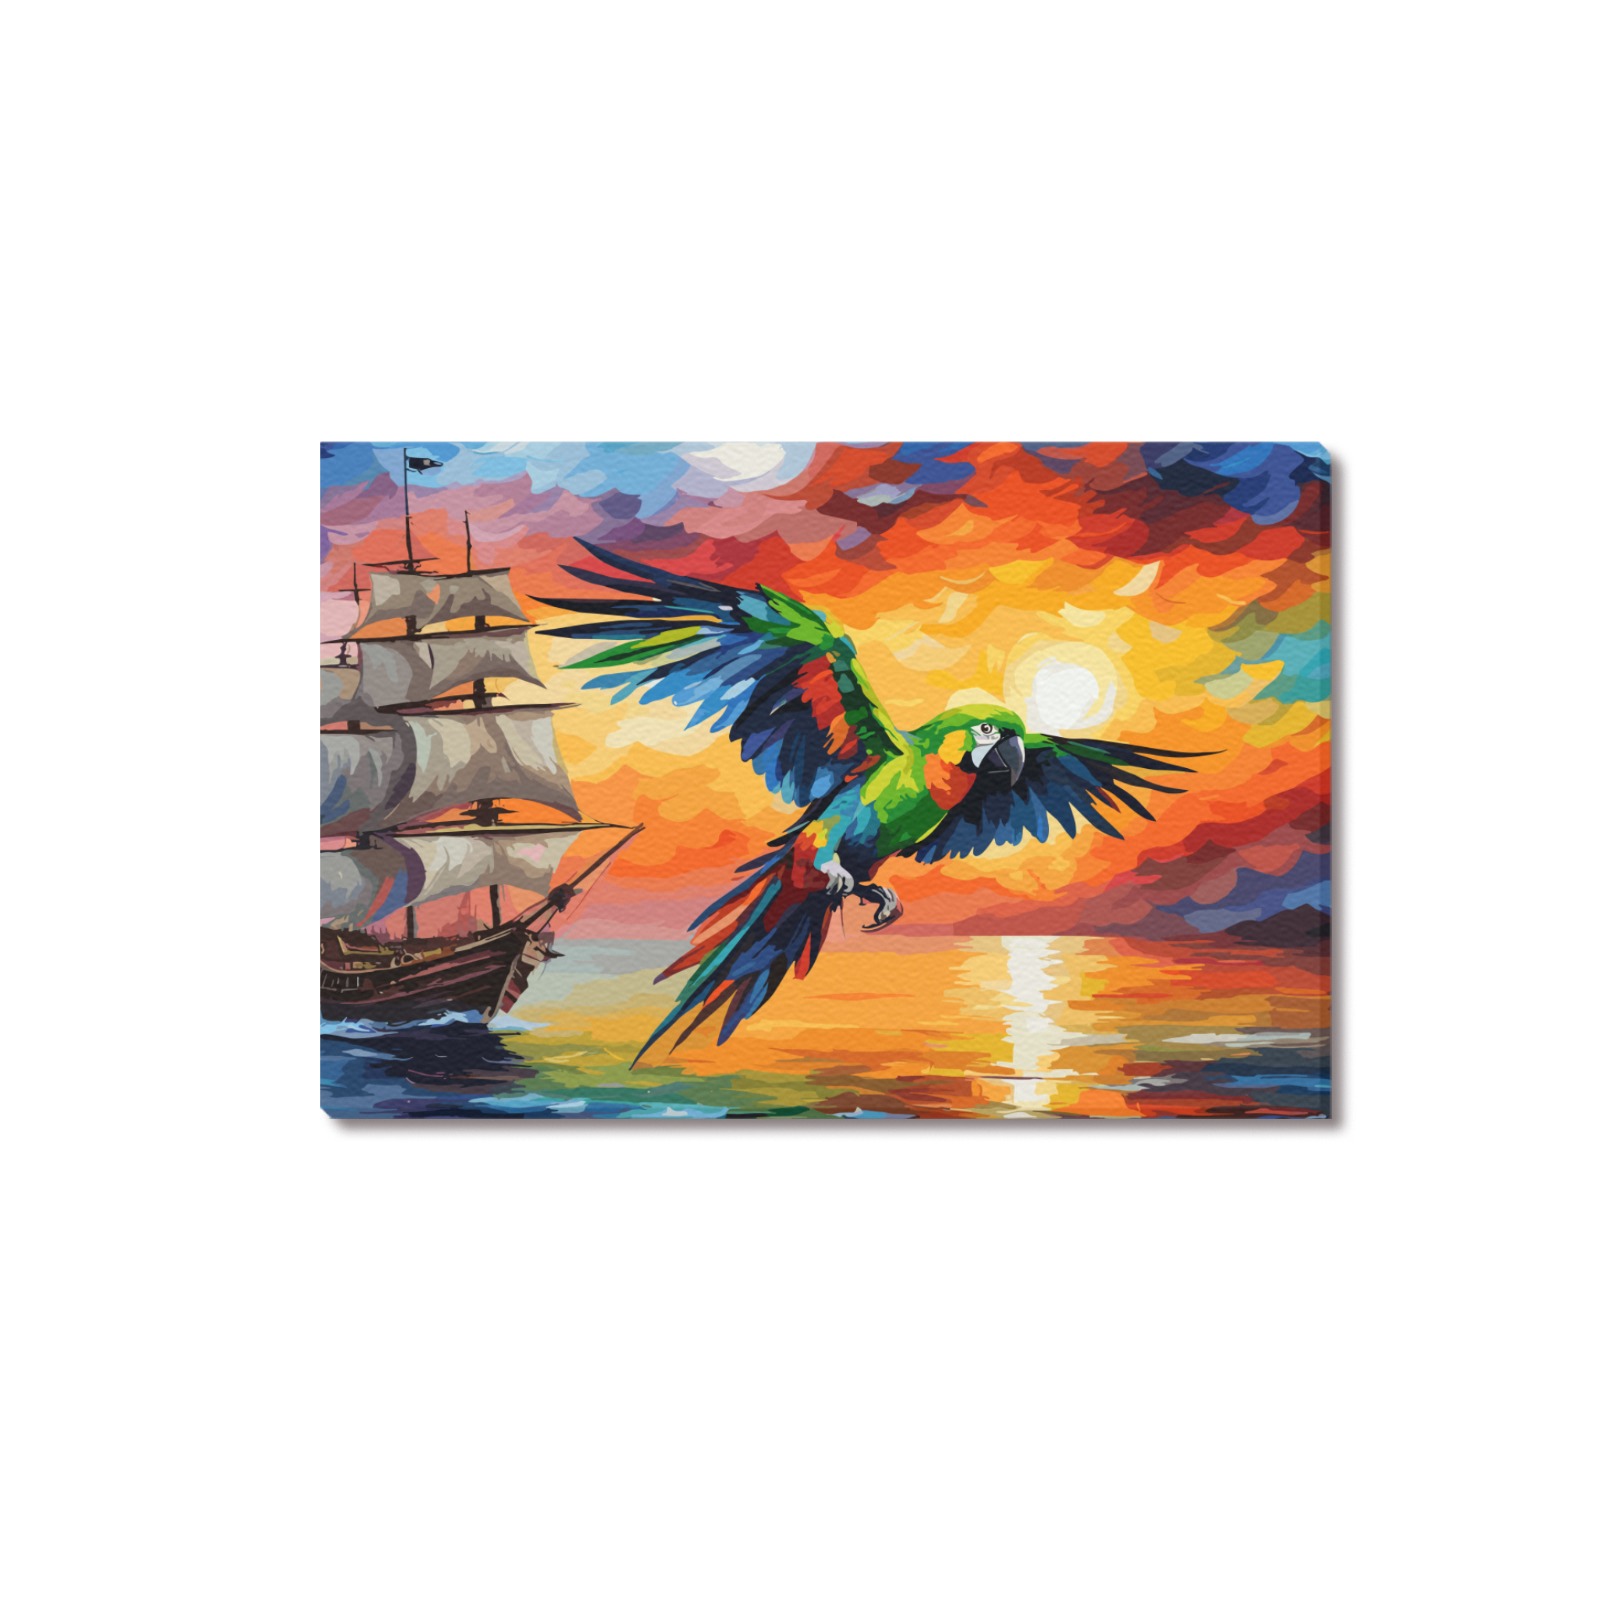 A parrot and a pirate ship. Dramatic ocean sunset. Upgraded Canvas Print 18"x12"